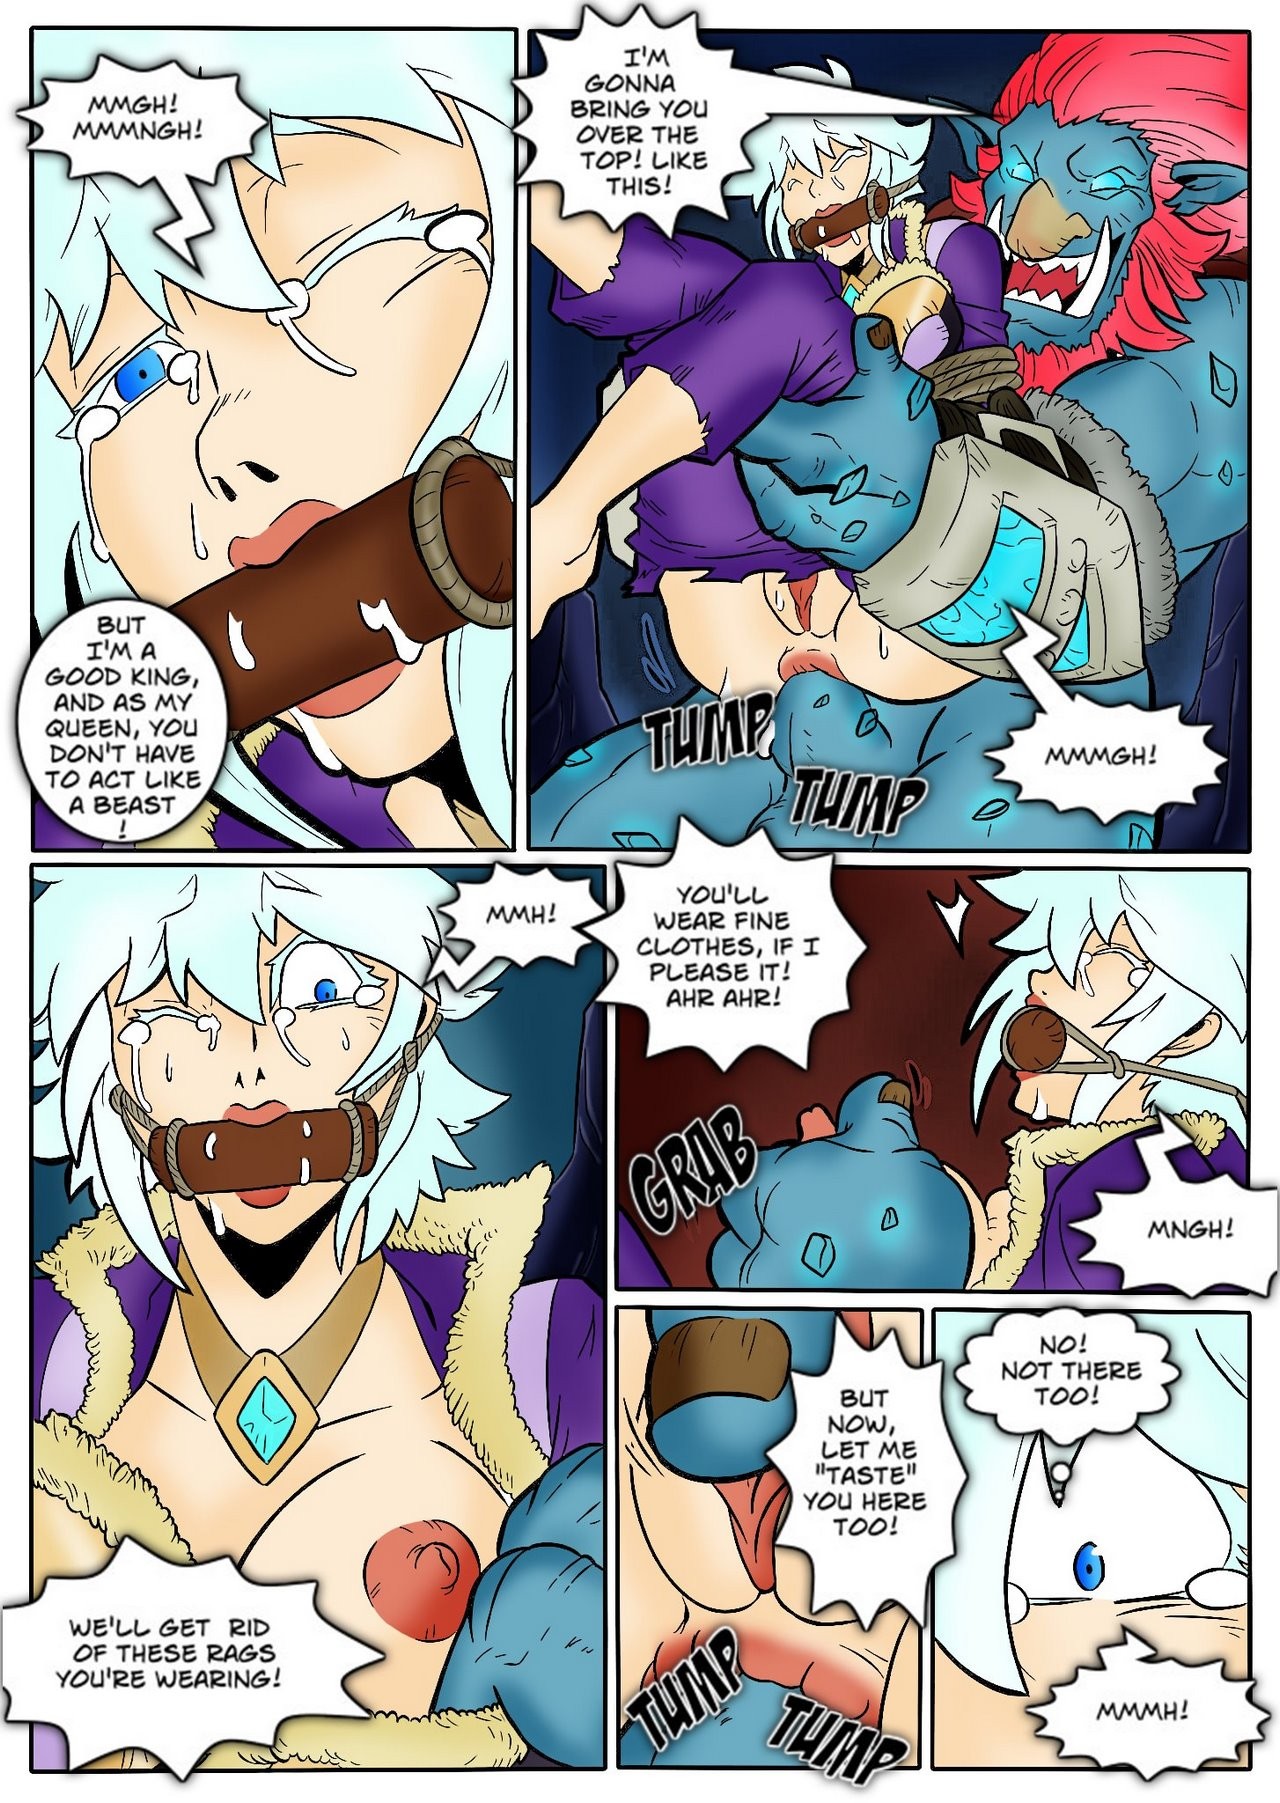 Tales of the Troll King ch. 1 - 3 ] [Colorized] porn comic picture 30